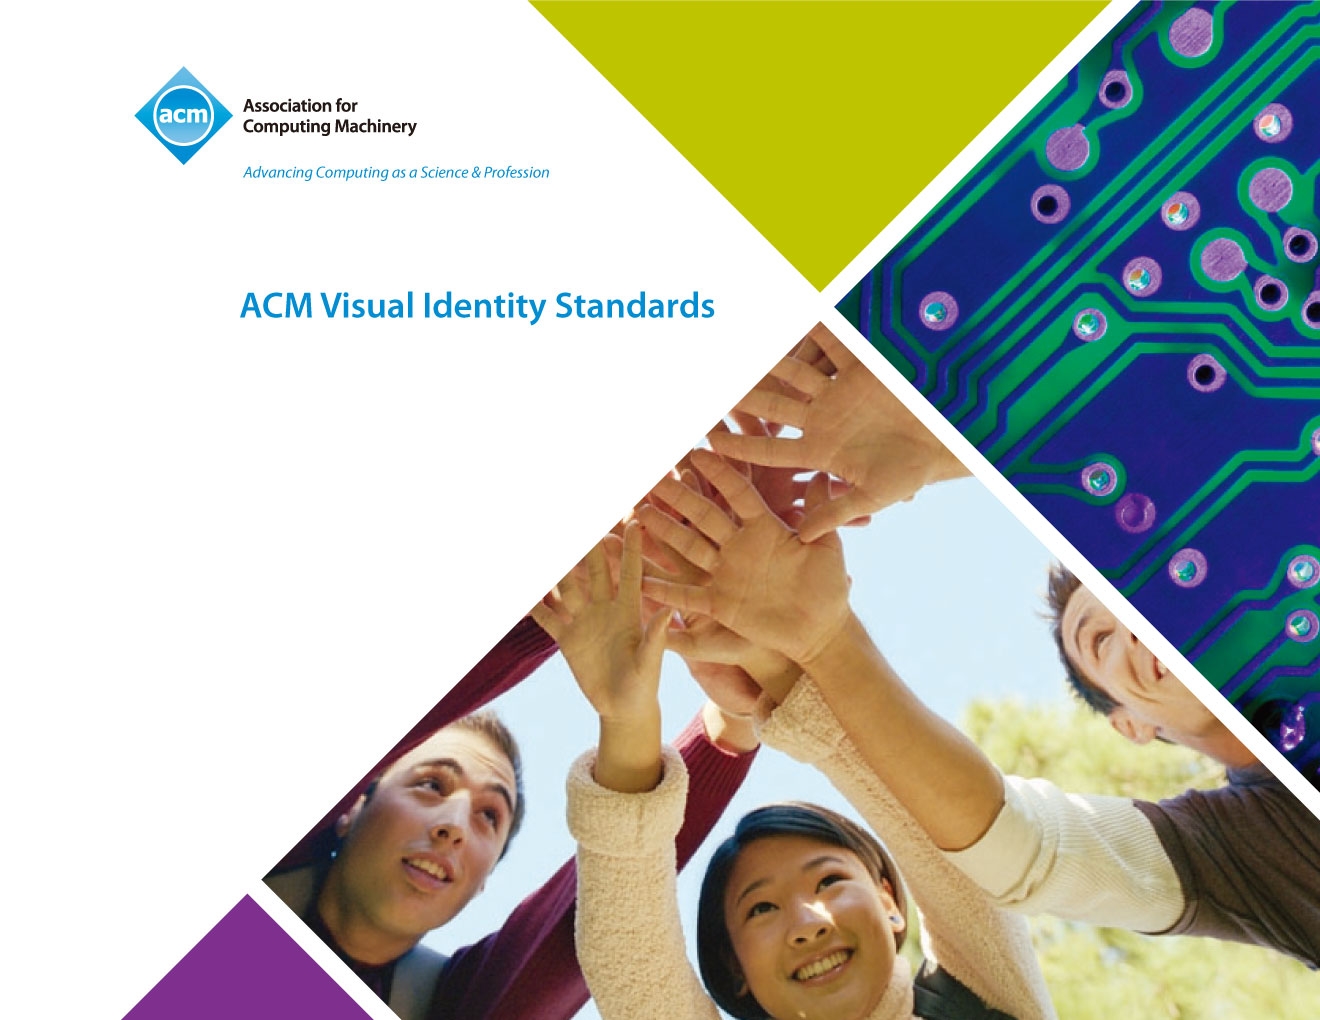 Association for Computing Machinery Visual Identity Standards